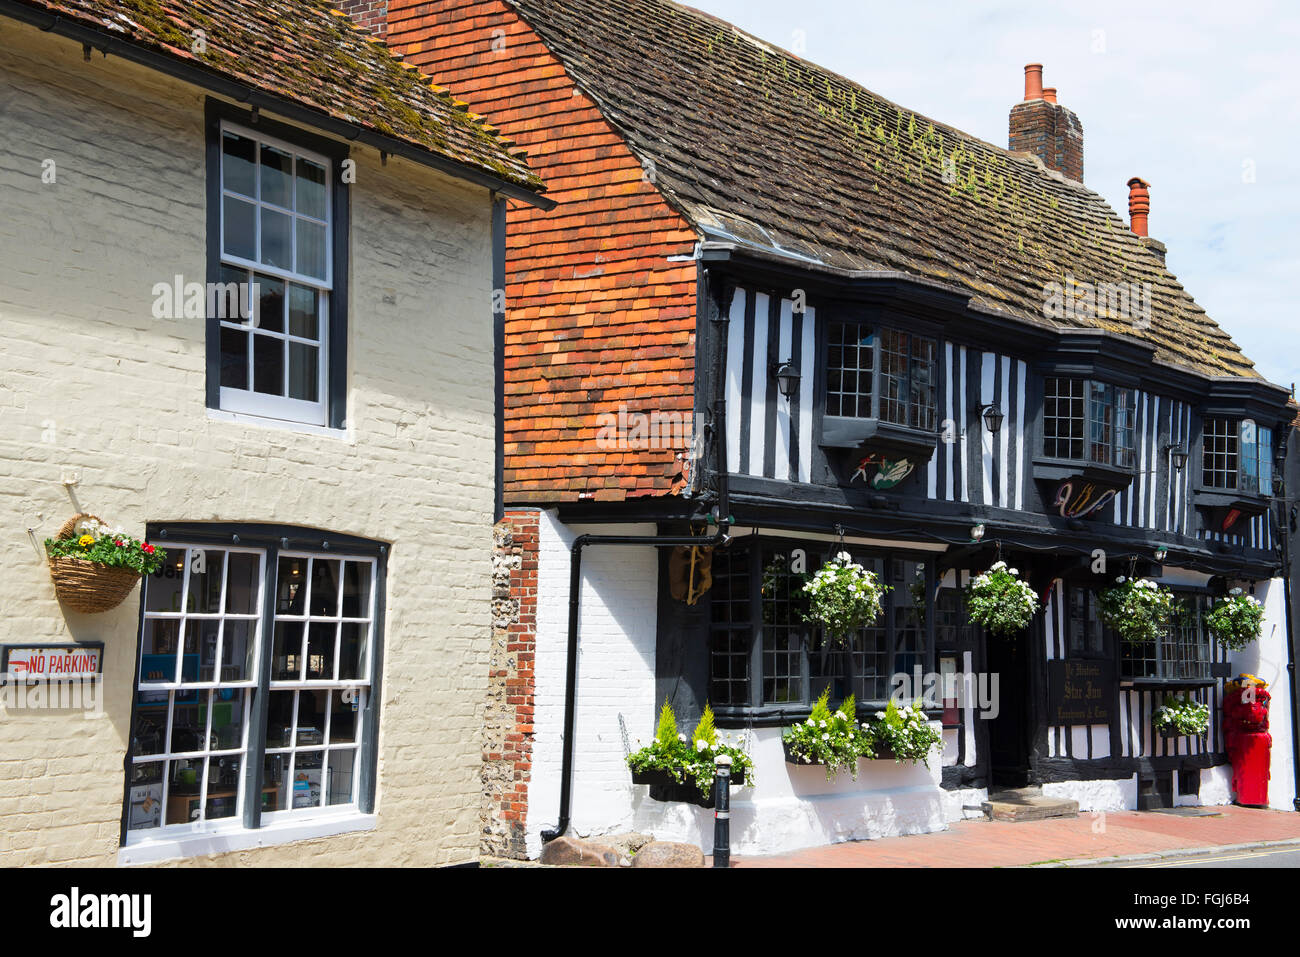 The Star Inn on the High Street in the village of Alfriston, East Sussex, UK Stock Photo